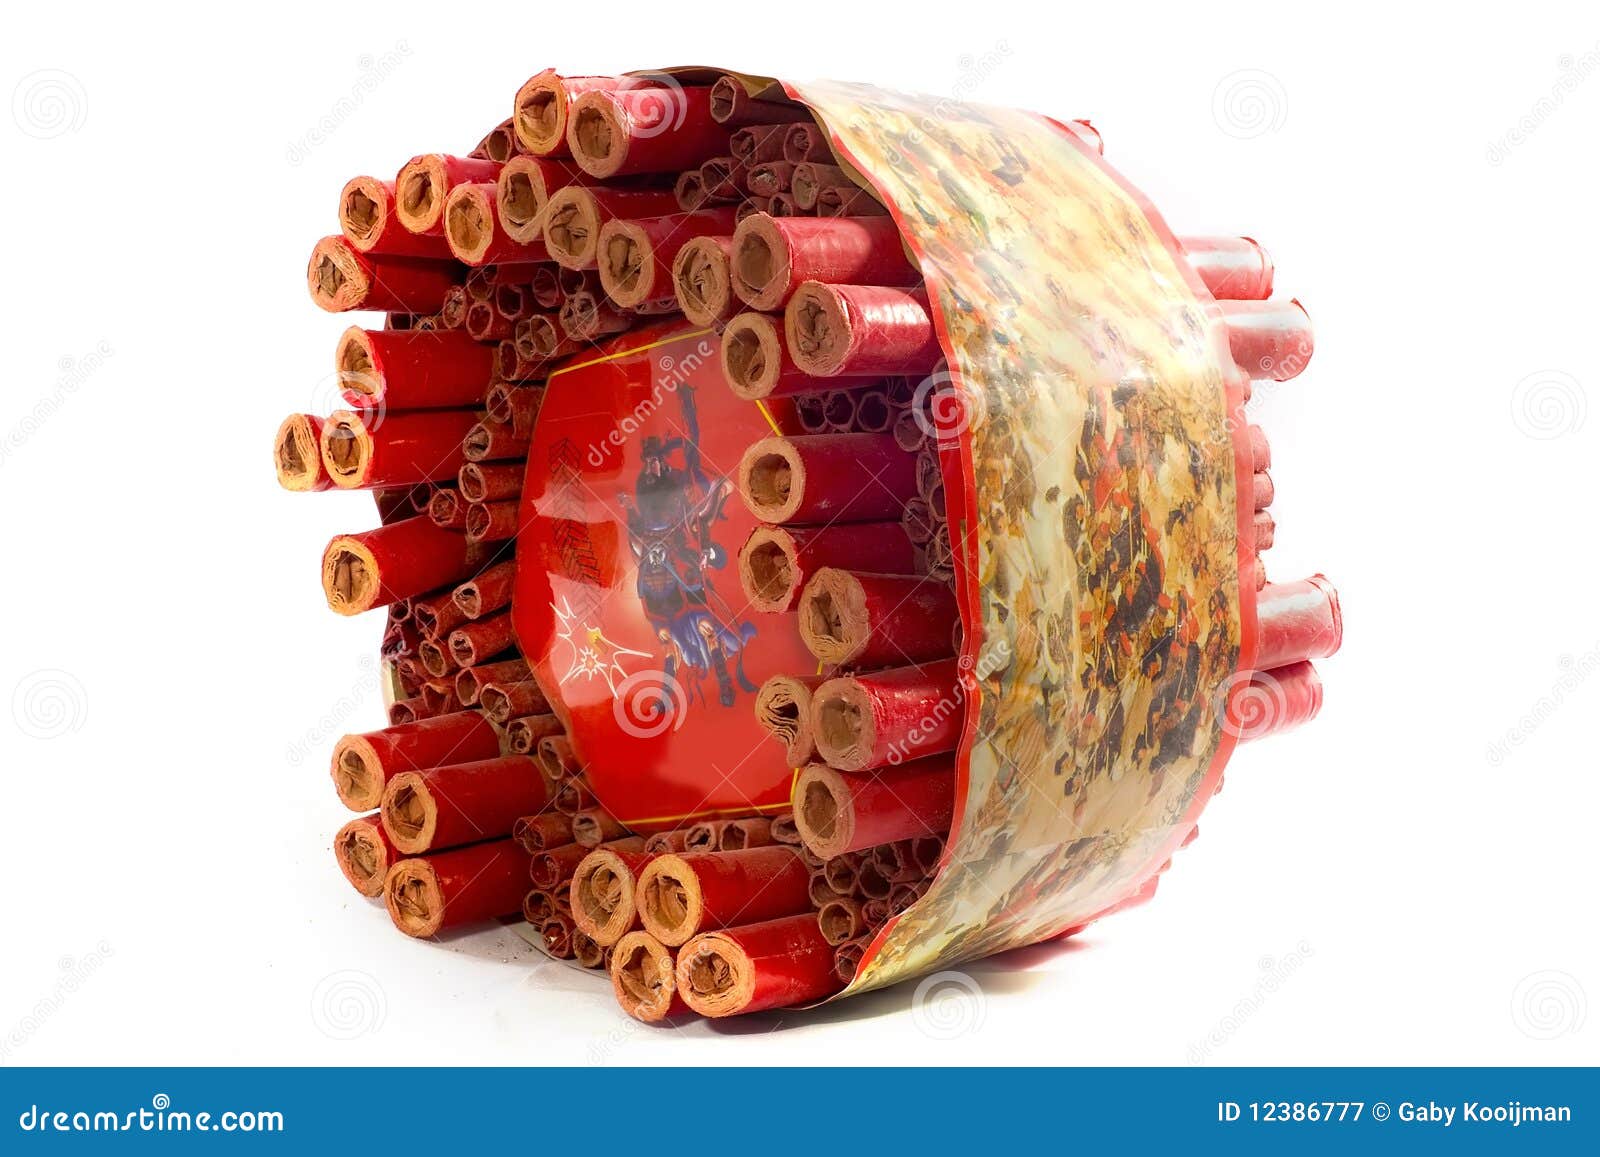 Chinese firecracker or firework with symbol of wealth isolated on